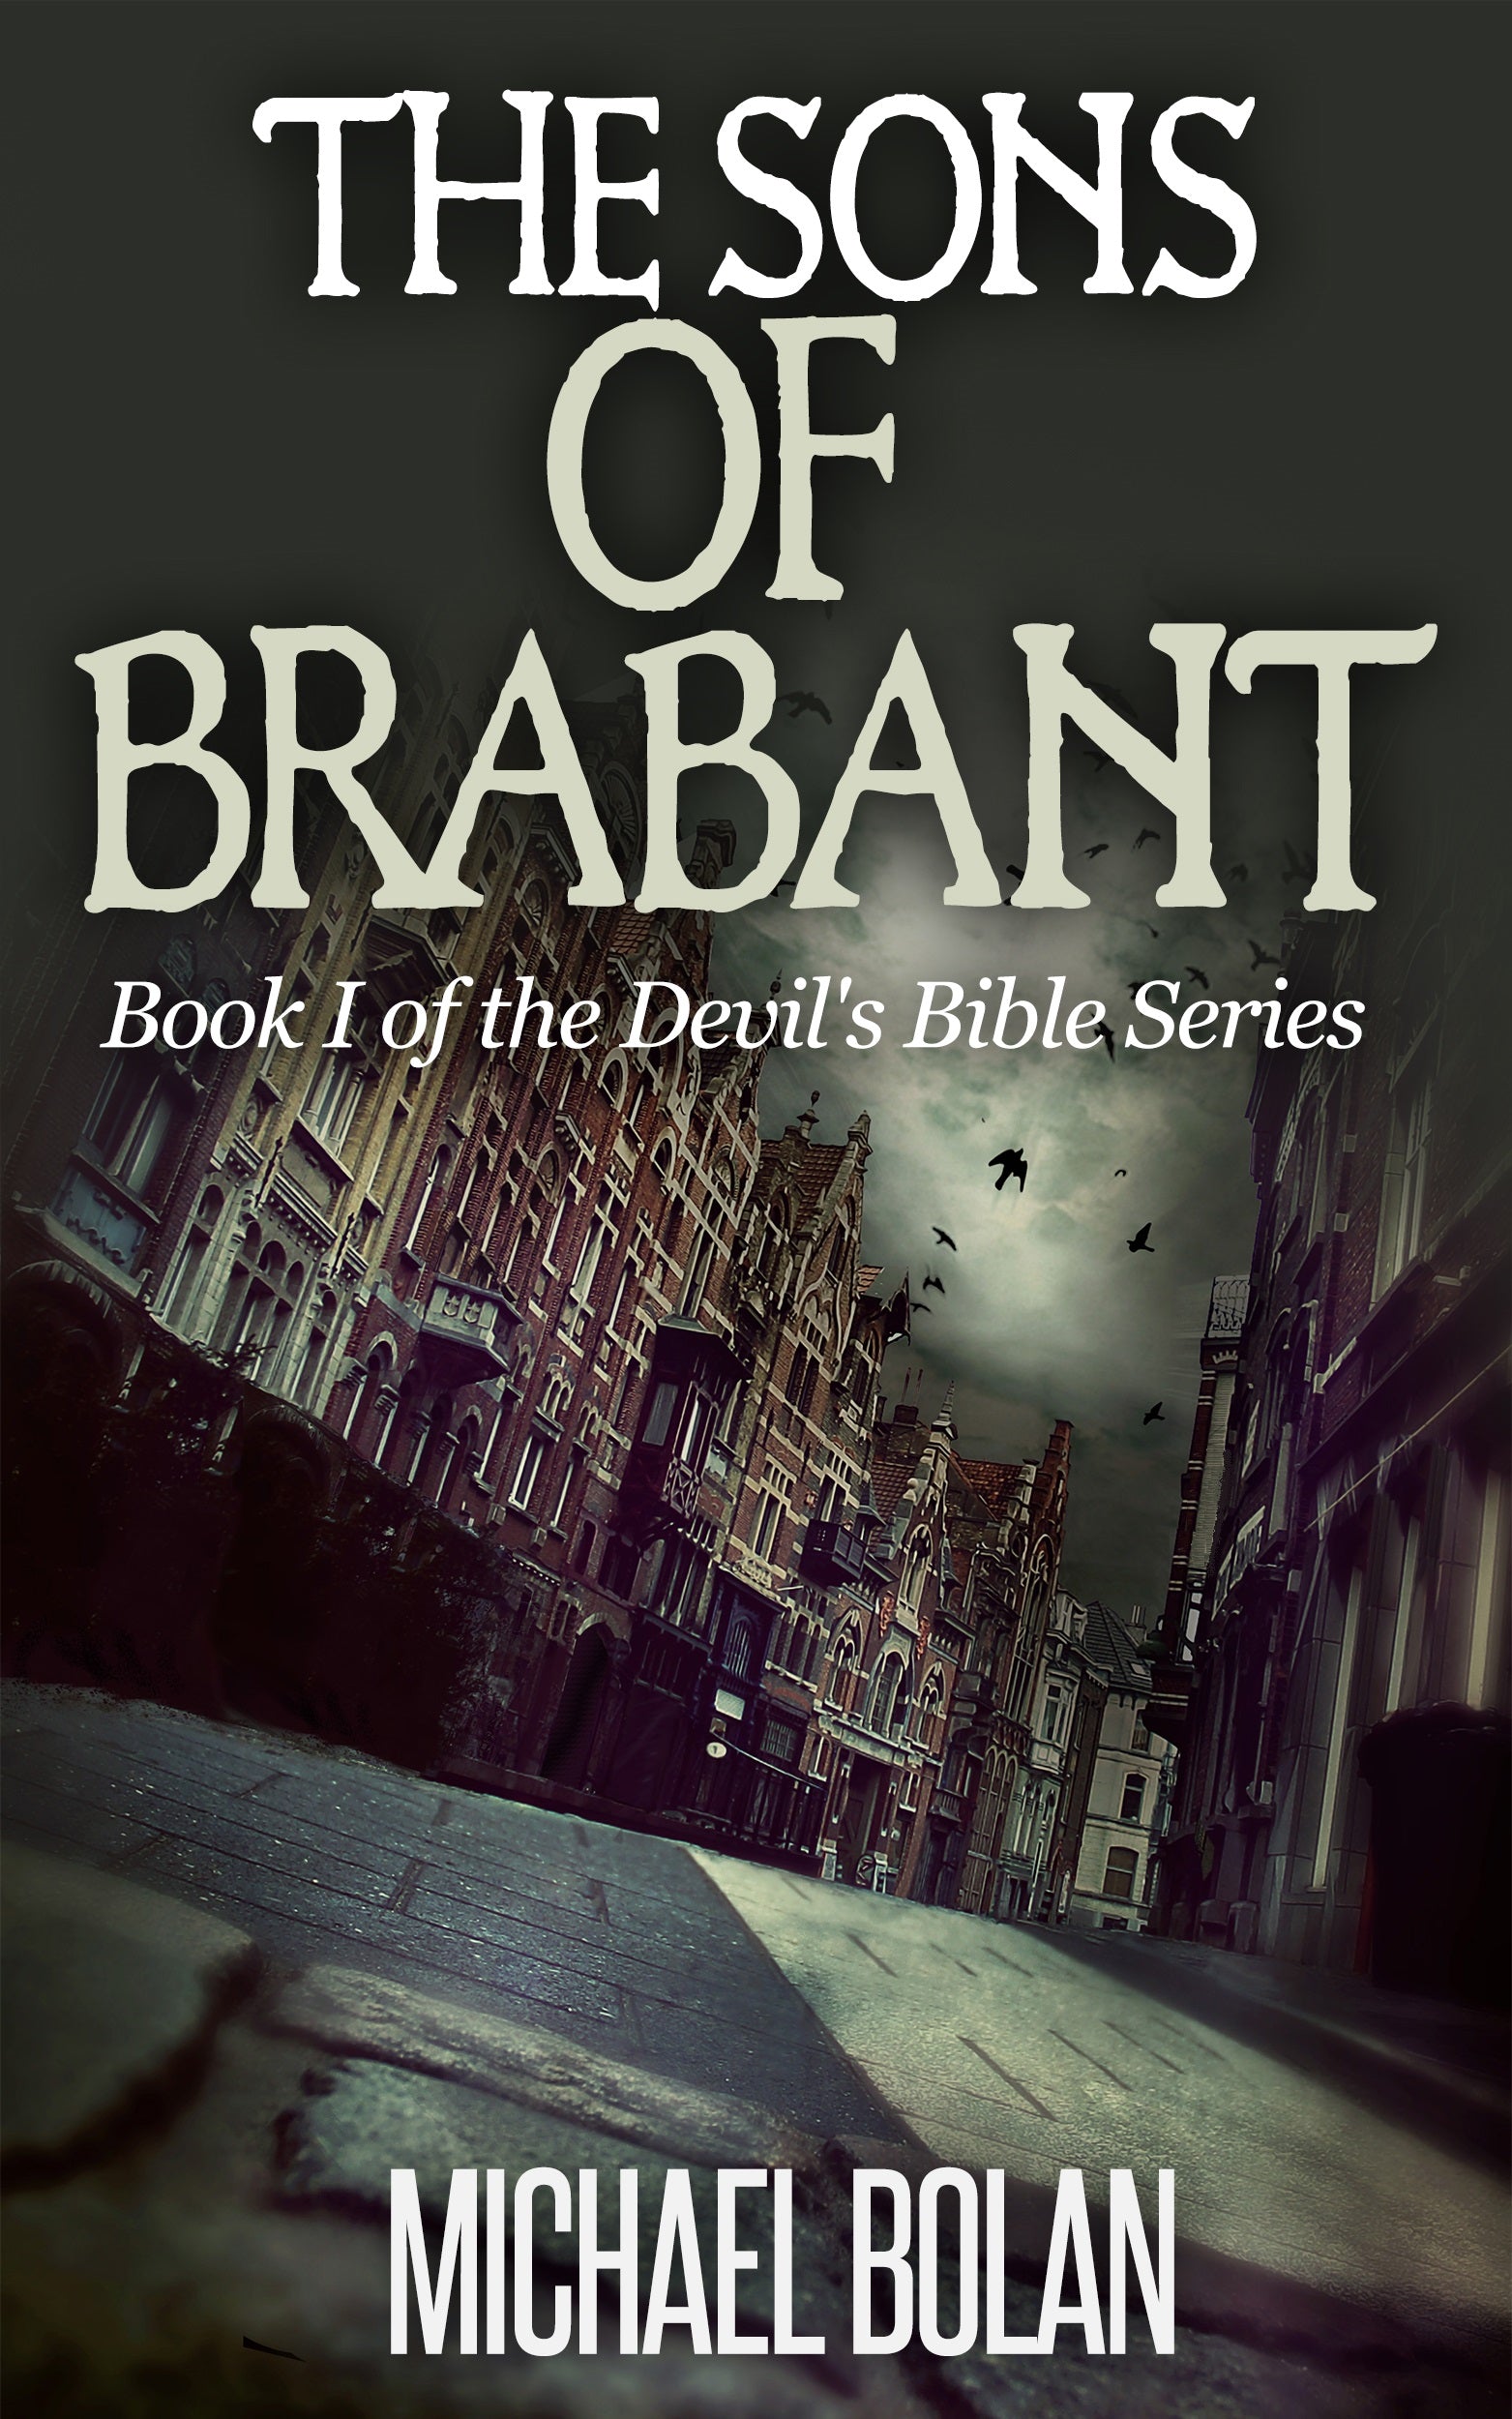 Book Review: The Sons of Brabant by Michael Bolan